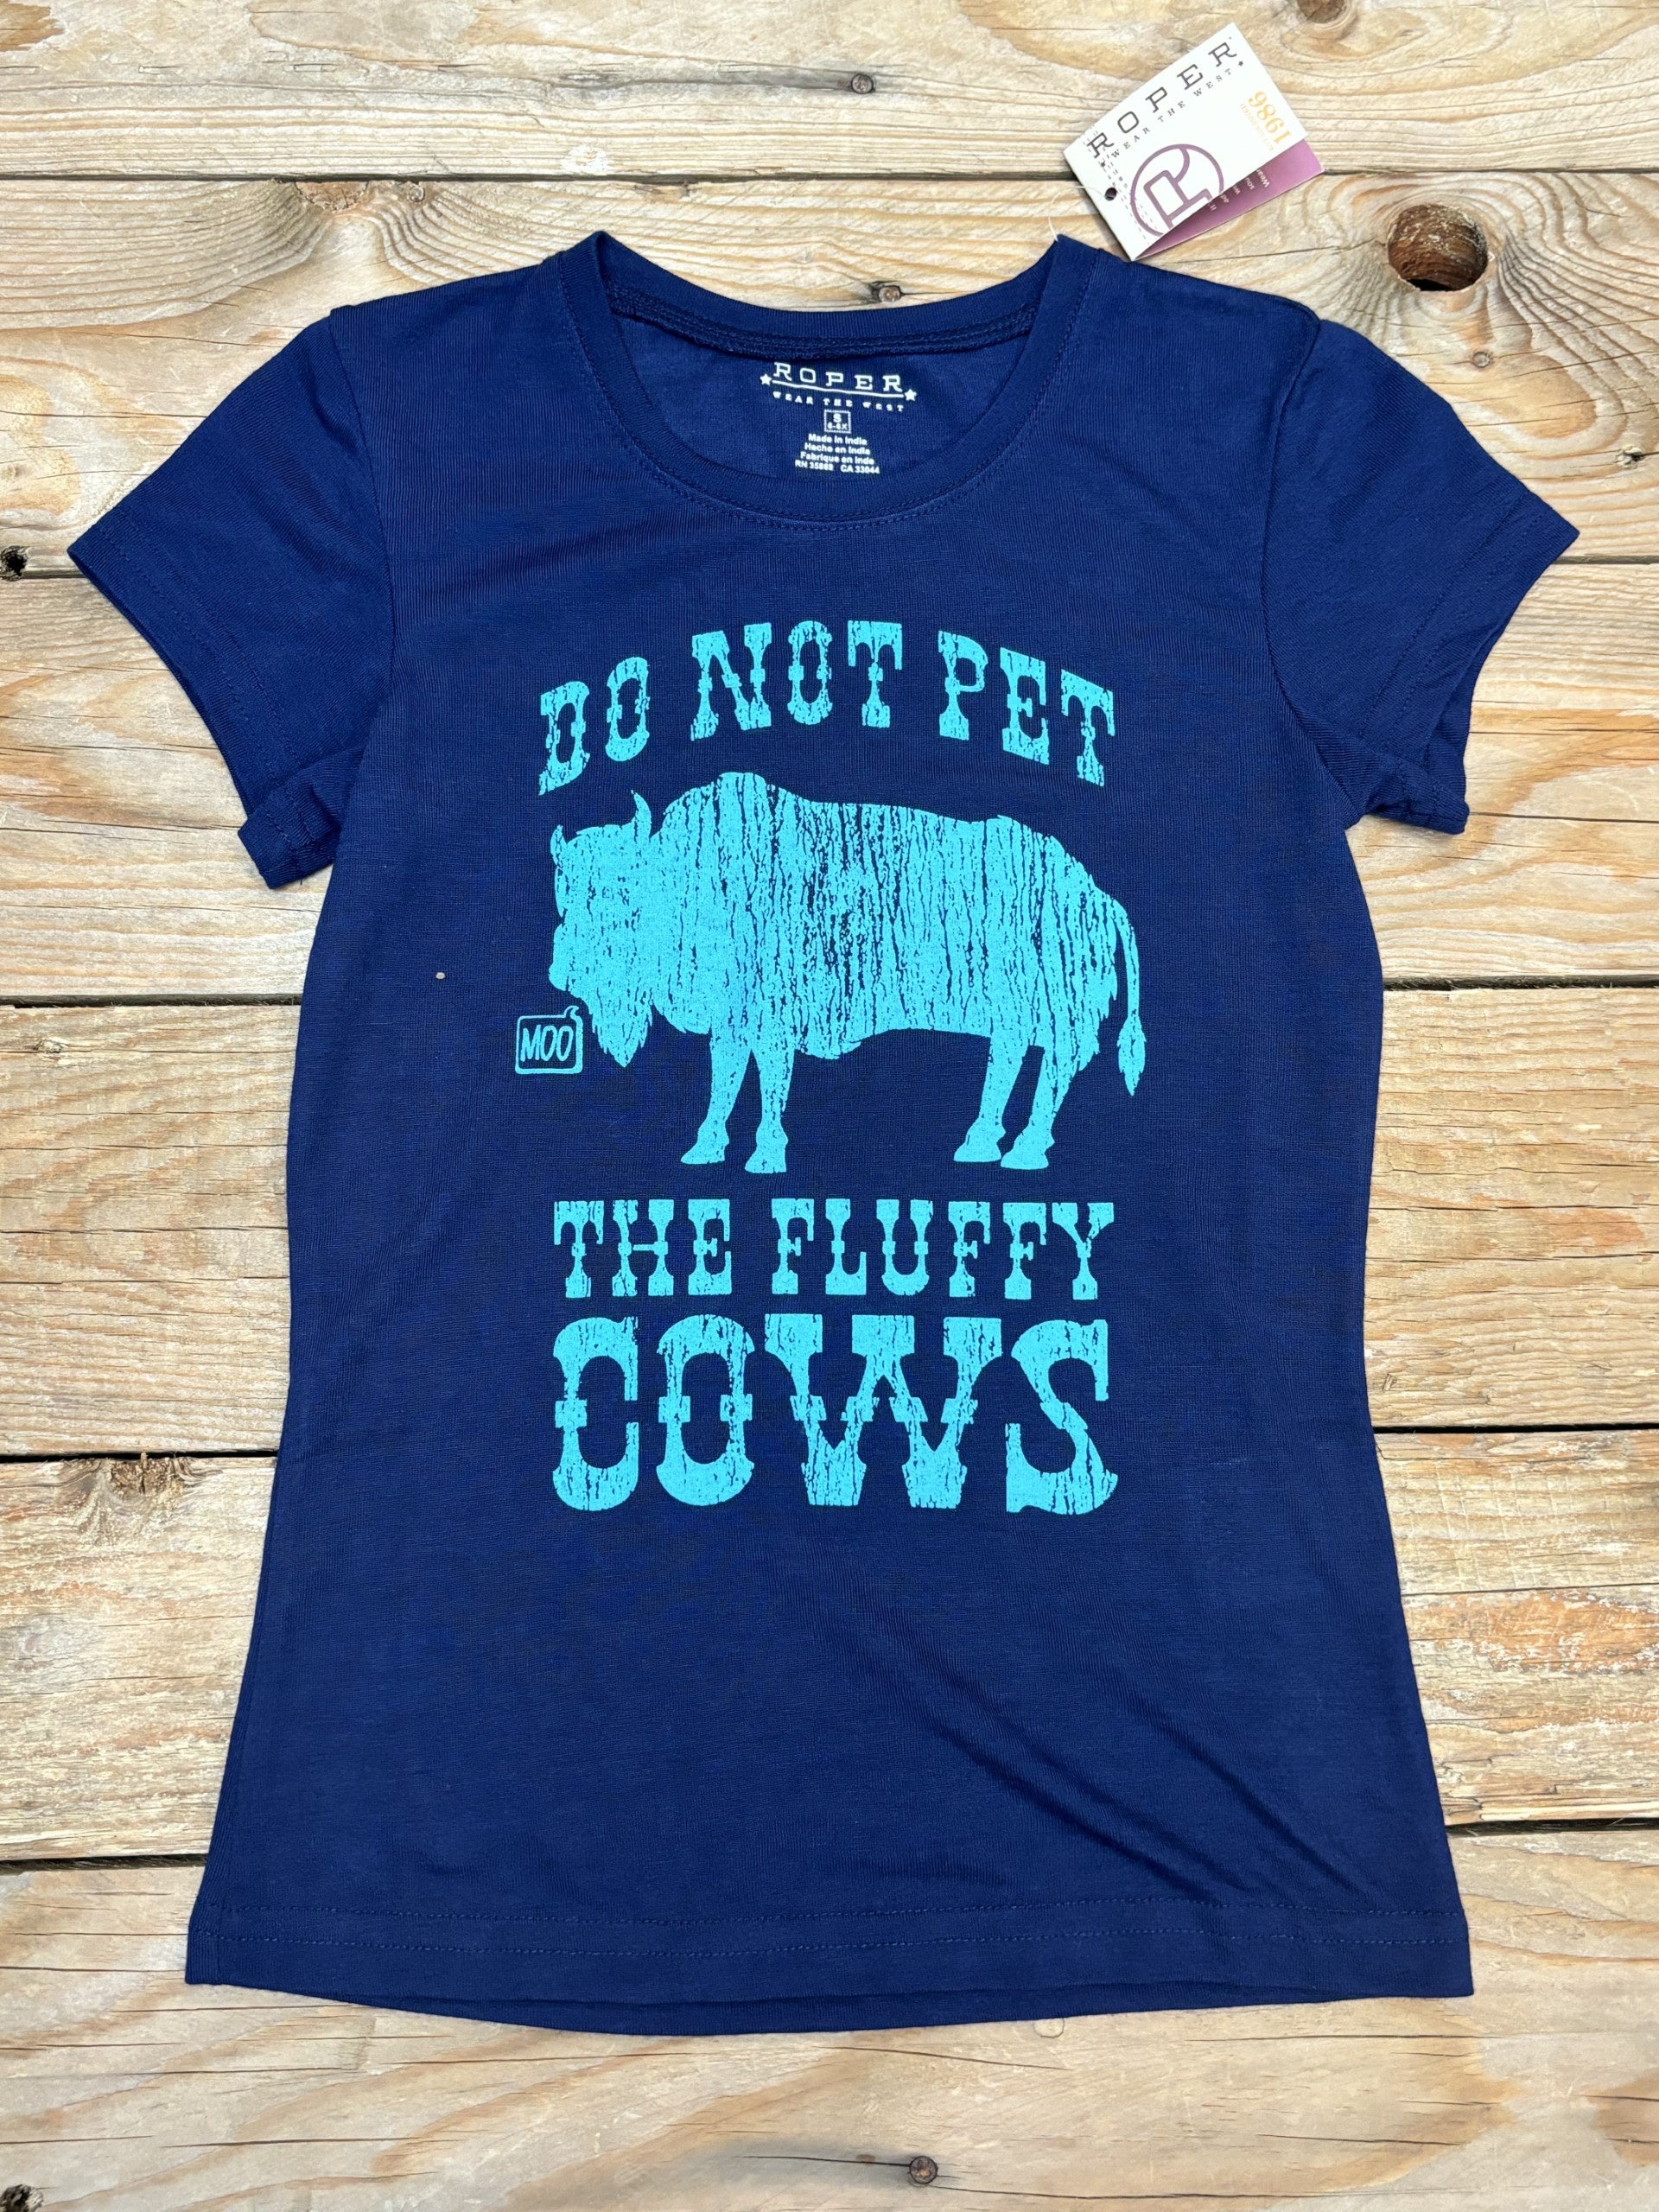 Girls Roper 'Don't Pat the Fluffy Cows' Tee - Blue (7136339853389)